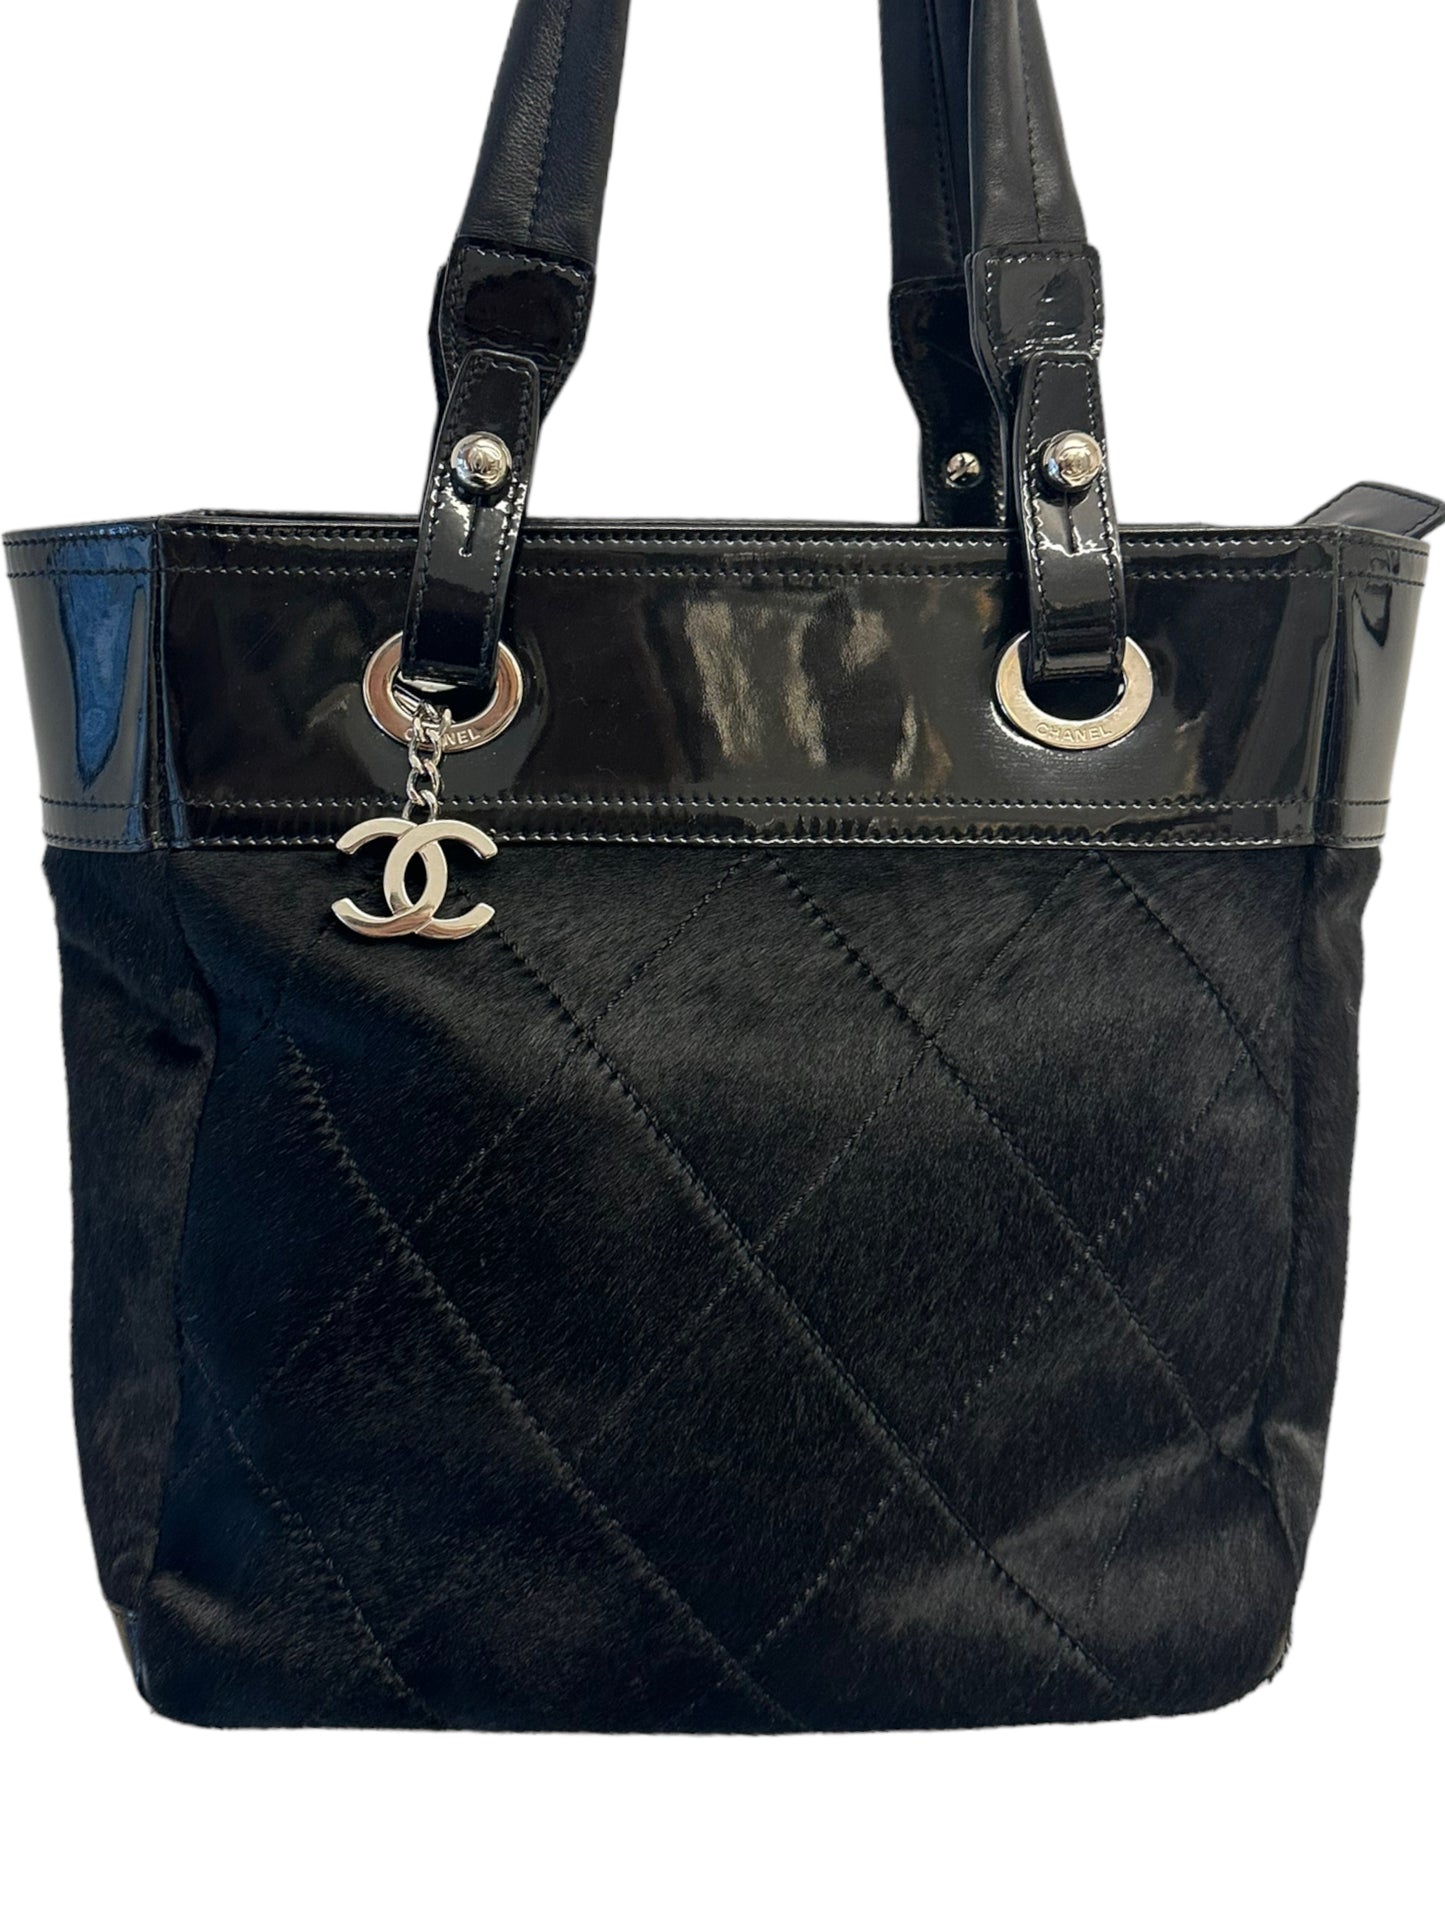 CHANEL - Black Patent Pony Hair Small Tote